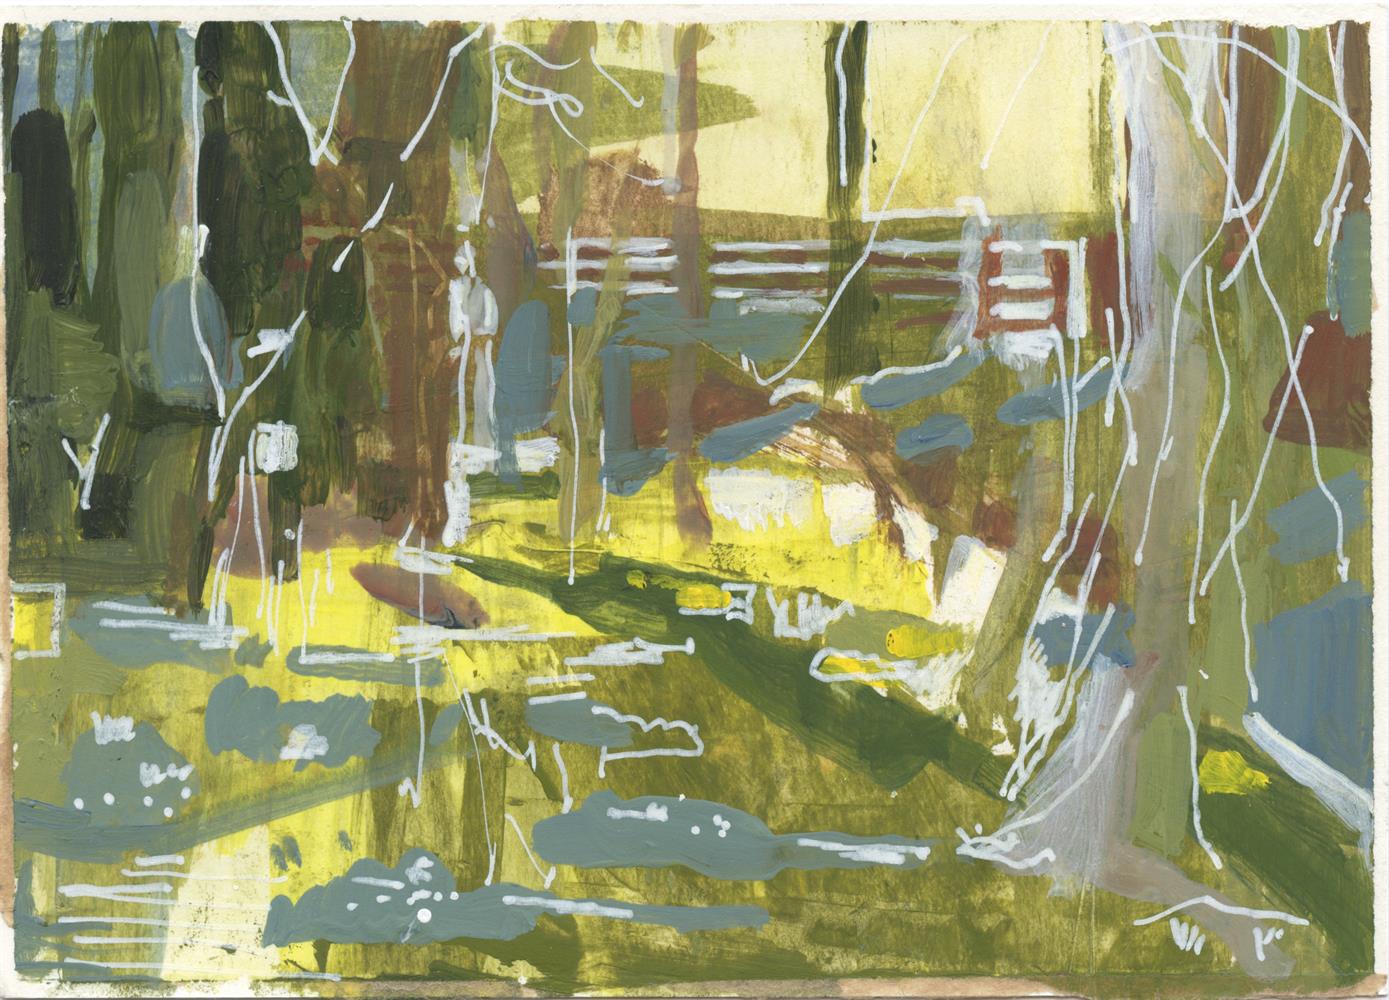 Anne Lever, Wood in Spring, 2021